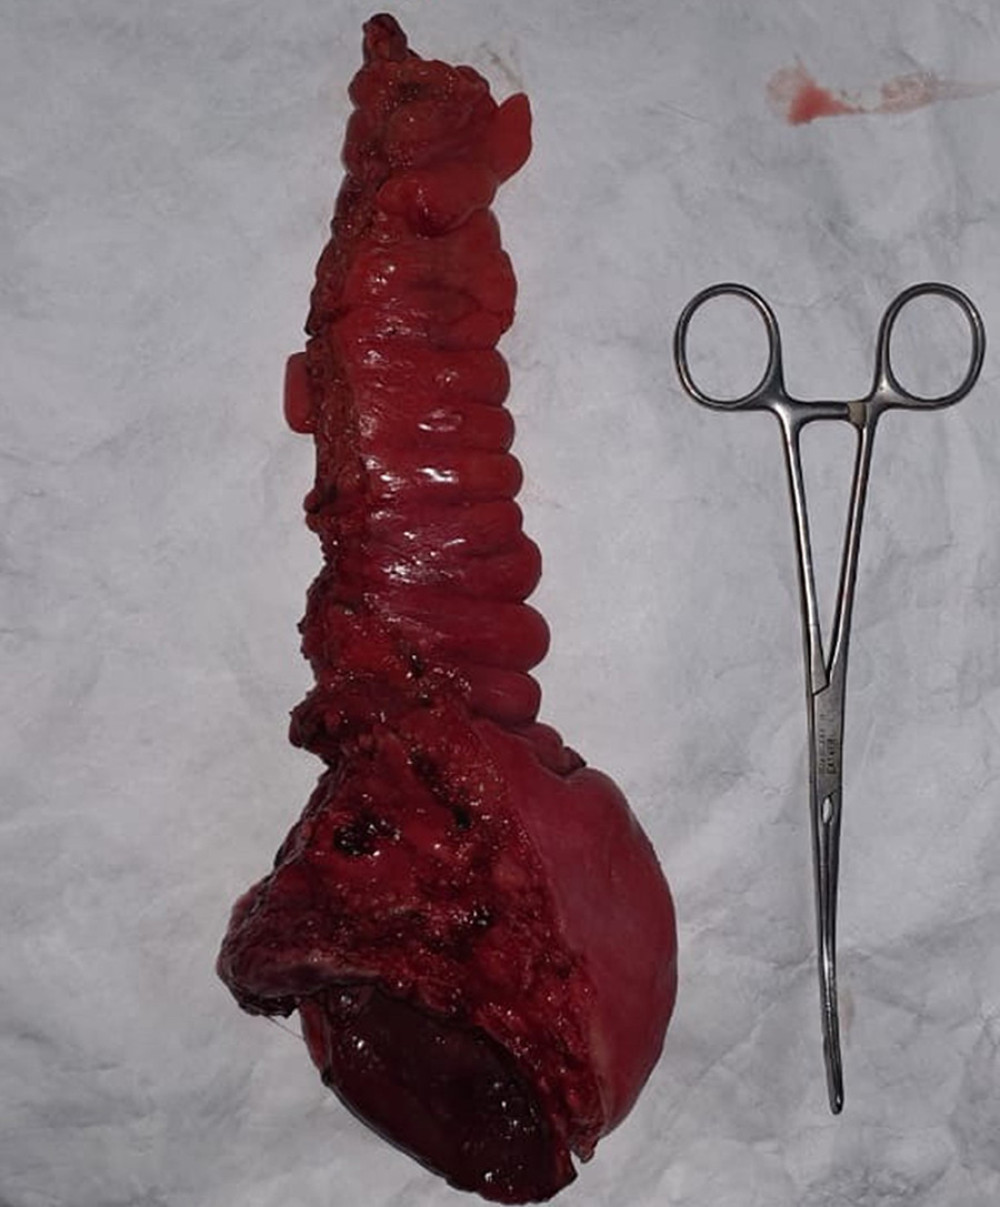 Resected prolapsed rectum and part of the sigmoid colon.